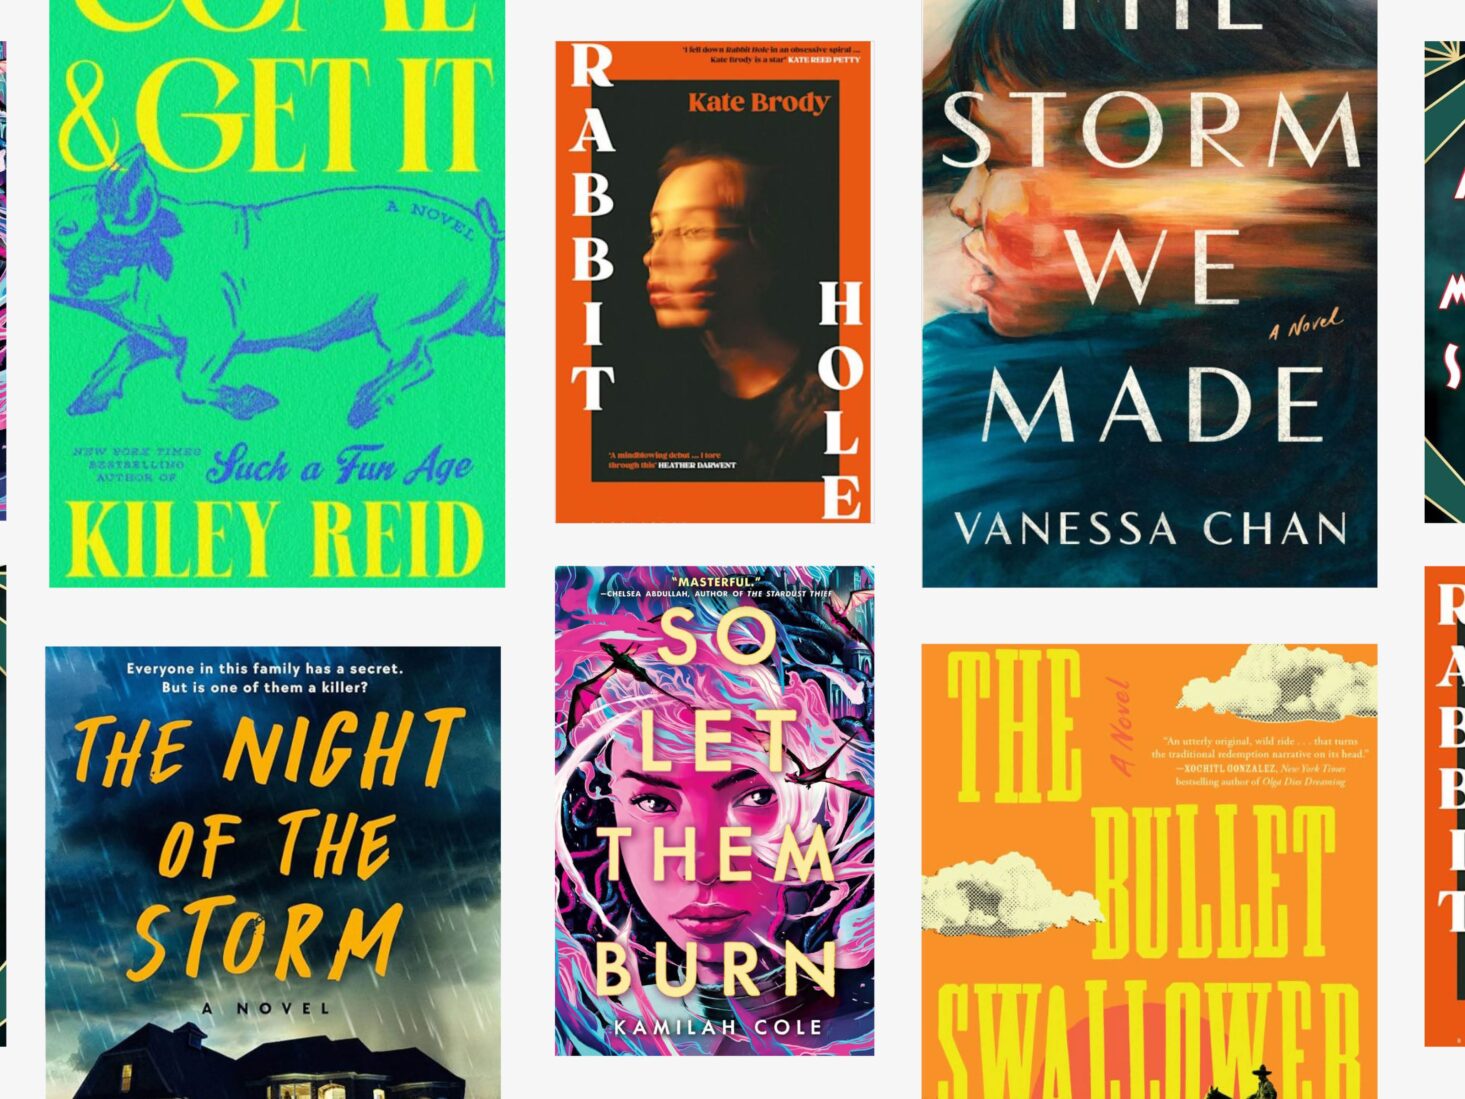 6 of the best travel books to read in 2024